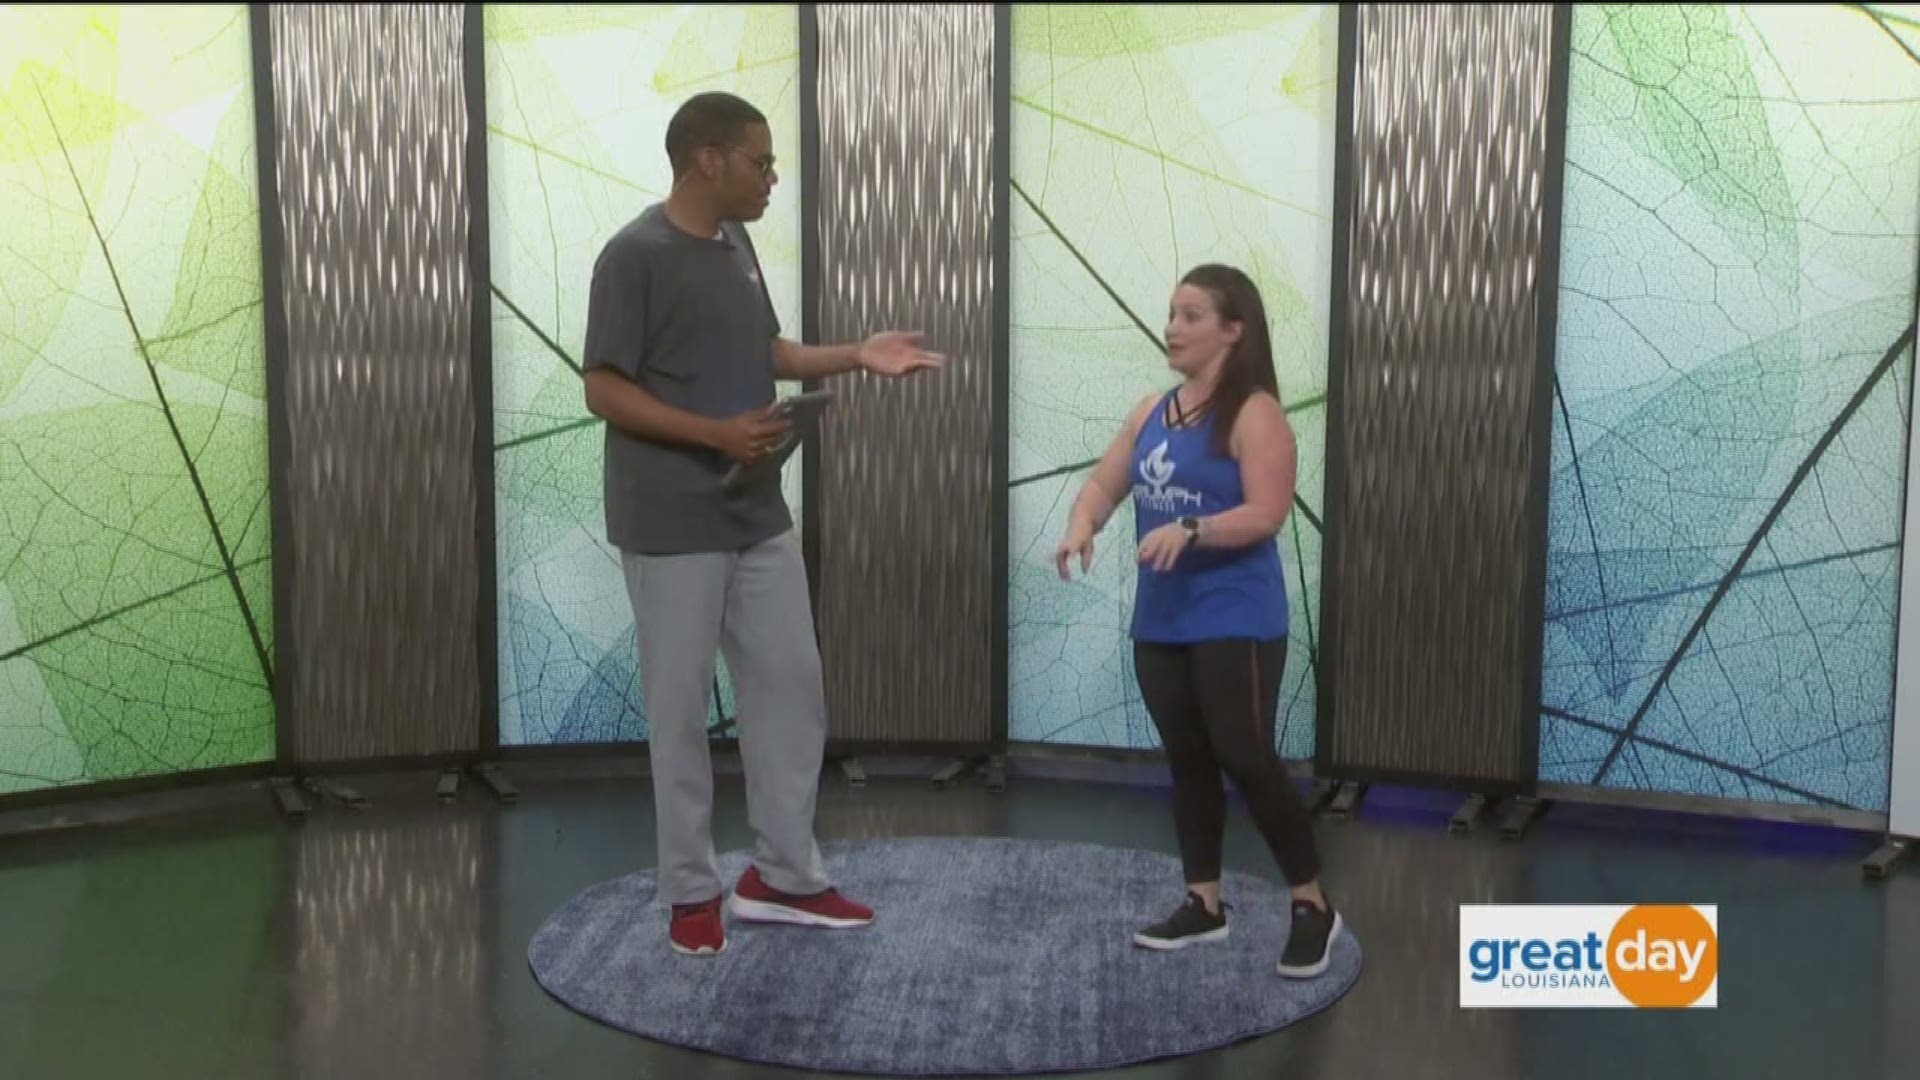 Jennifer Maraist with Triumph Fitness stopped by to offer four tips on how to stay stress-free during the holiday season.